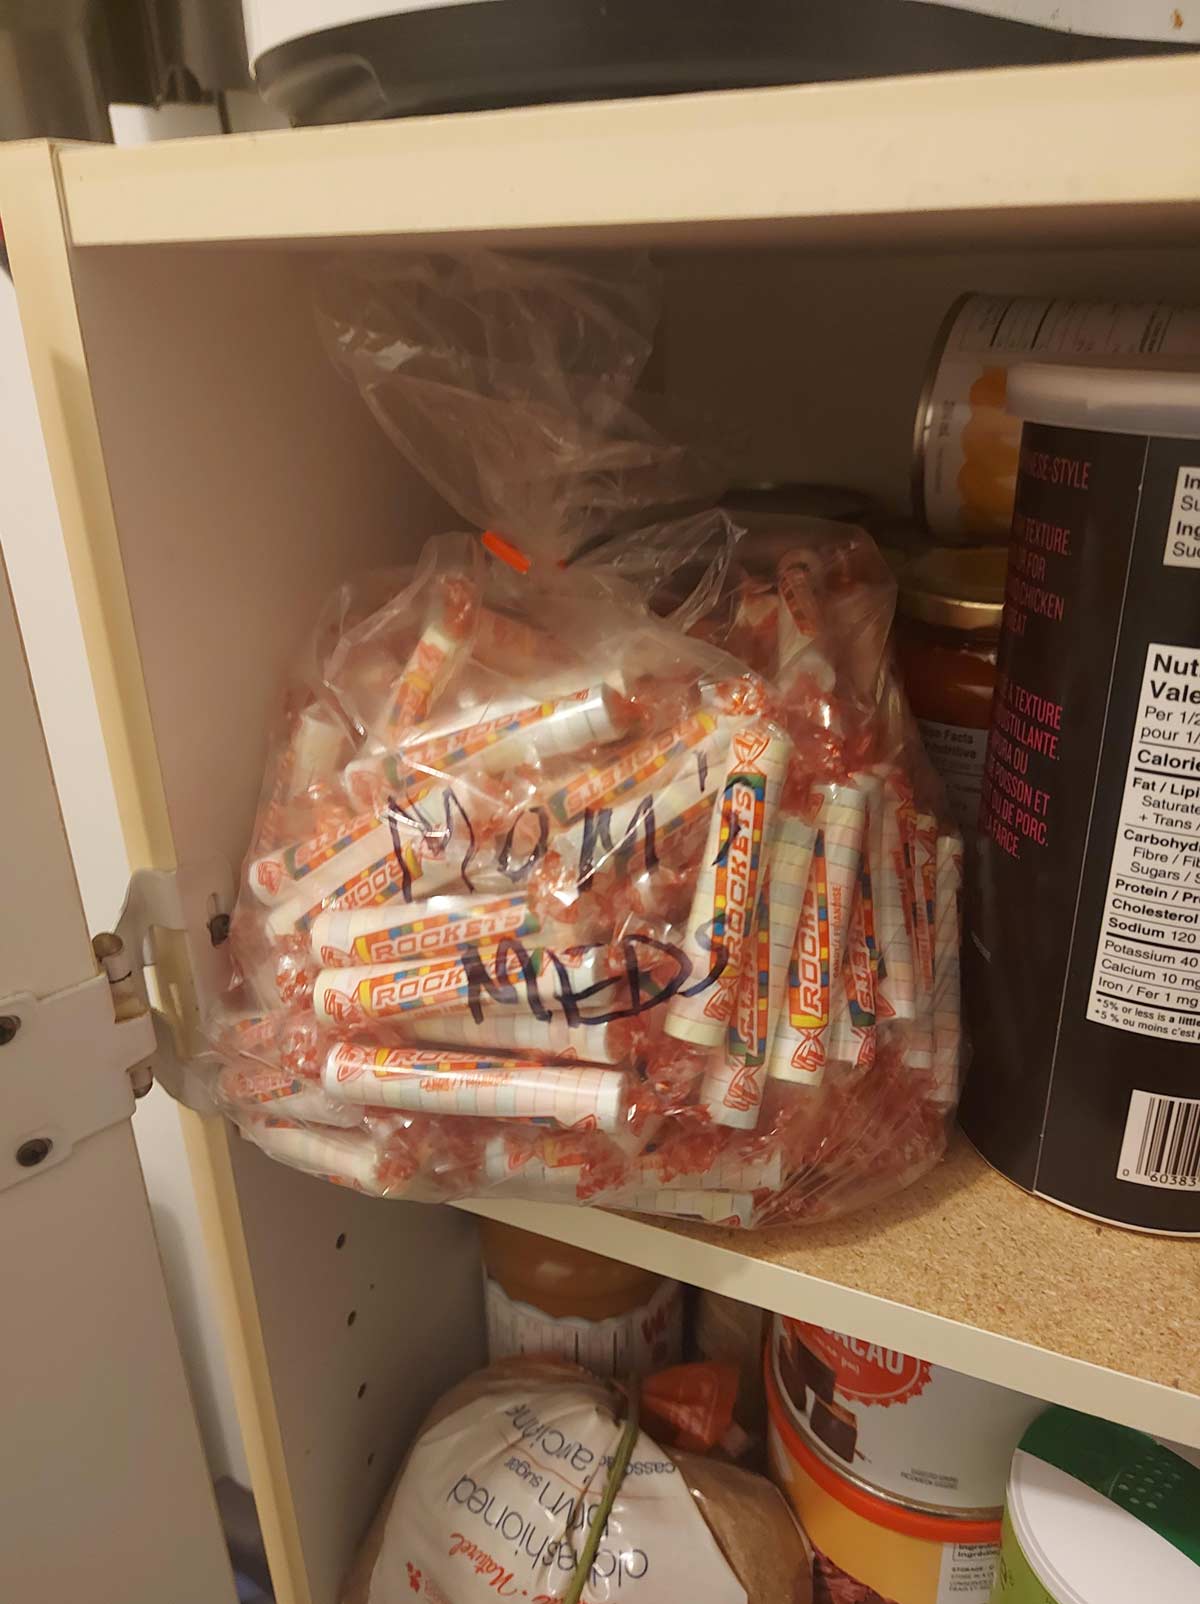 Cool Stuff My mom is diabetic. She eats Rockets to raise her sugar levels. I come to the pantry looking for something to snack on and find this